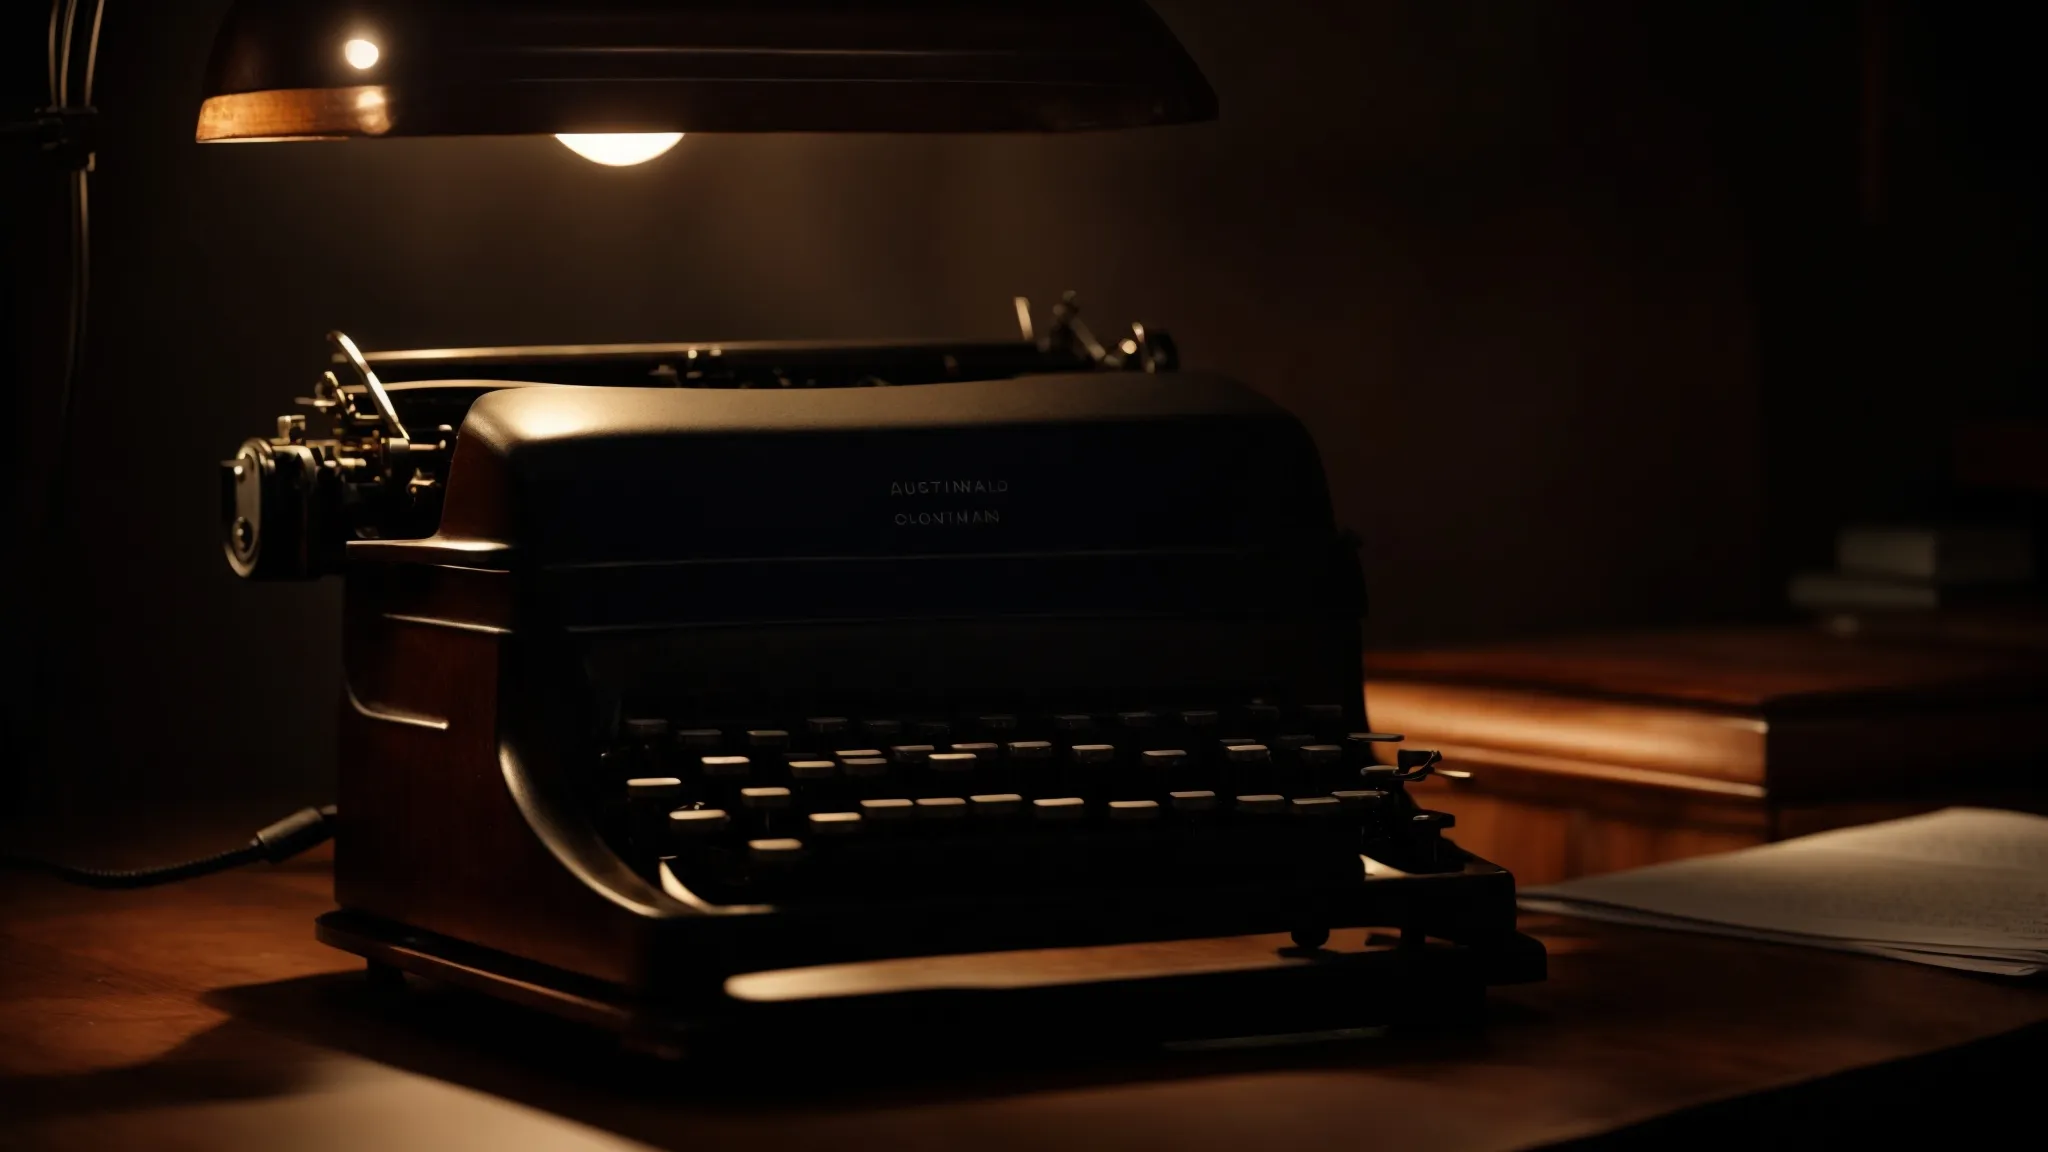 a vintage typewriter sits alone on an ancient wooden desk, illuminated by the soft glow of a single desk lamp in a dark room.